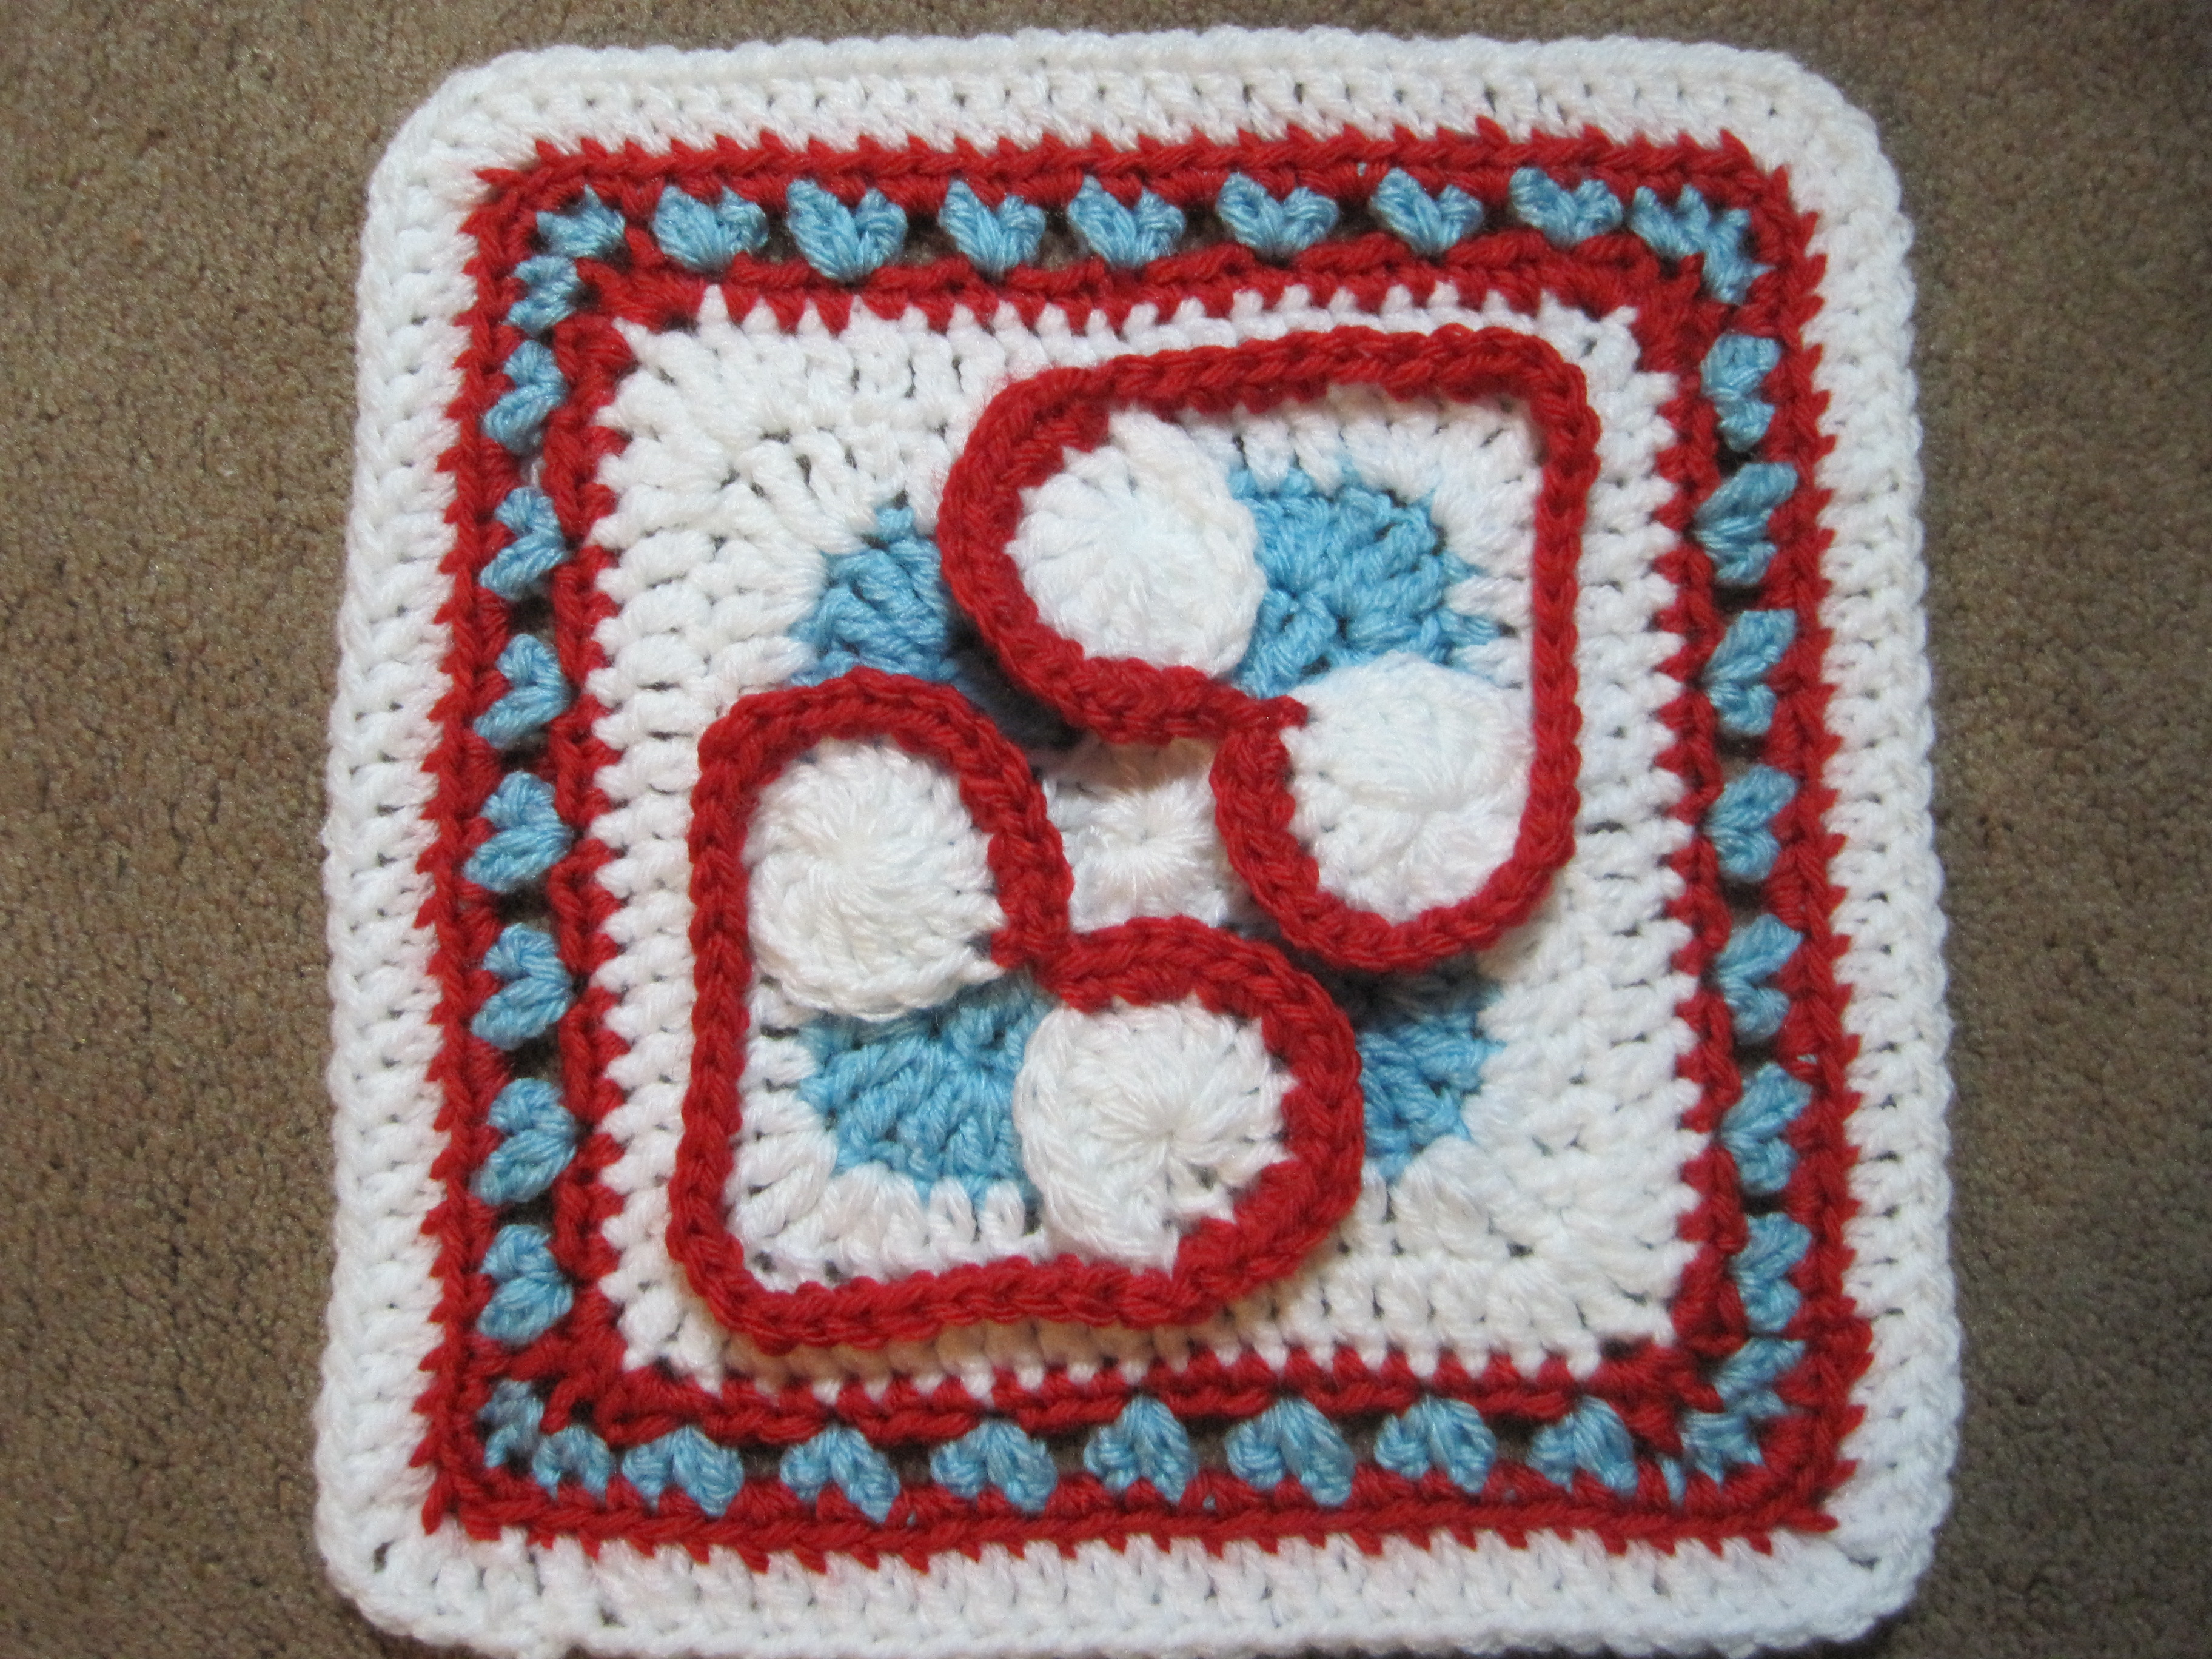 Ravelry Patterns Crochet Heart To Heart Afghan Block Free With Coupon Code Julie Yeager Designs